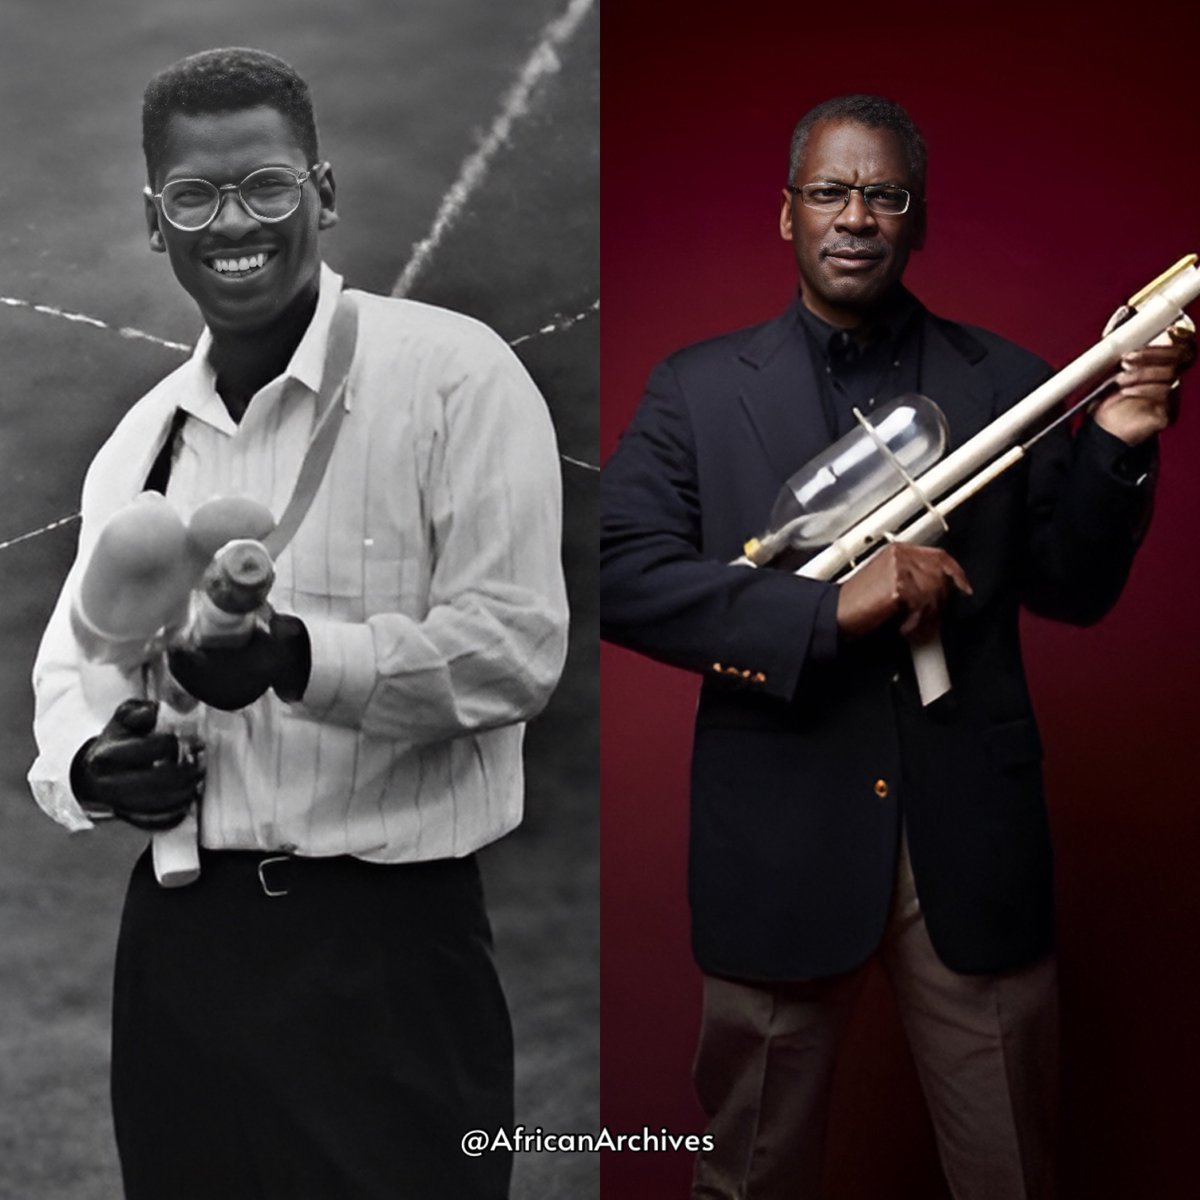 Lonnie Johnson, NASA engineer, invented the Super Soaker. He made your childhood hot summers fun. He turns 74 today. Happy Birthday!